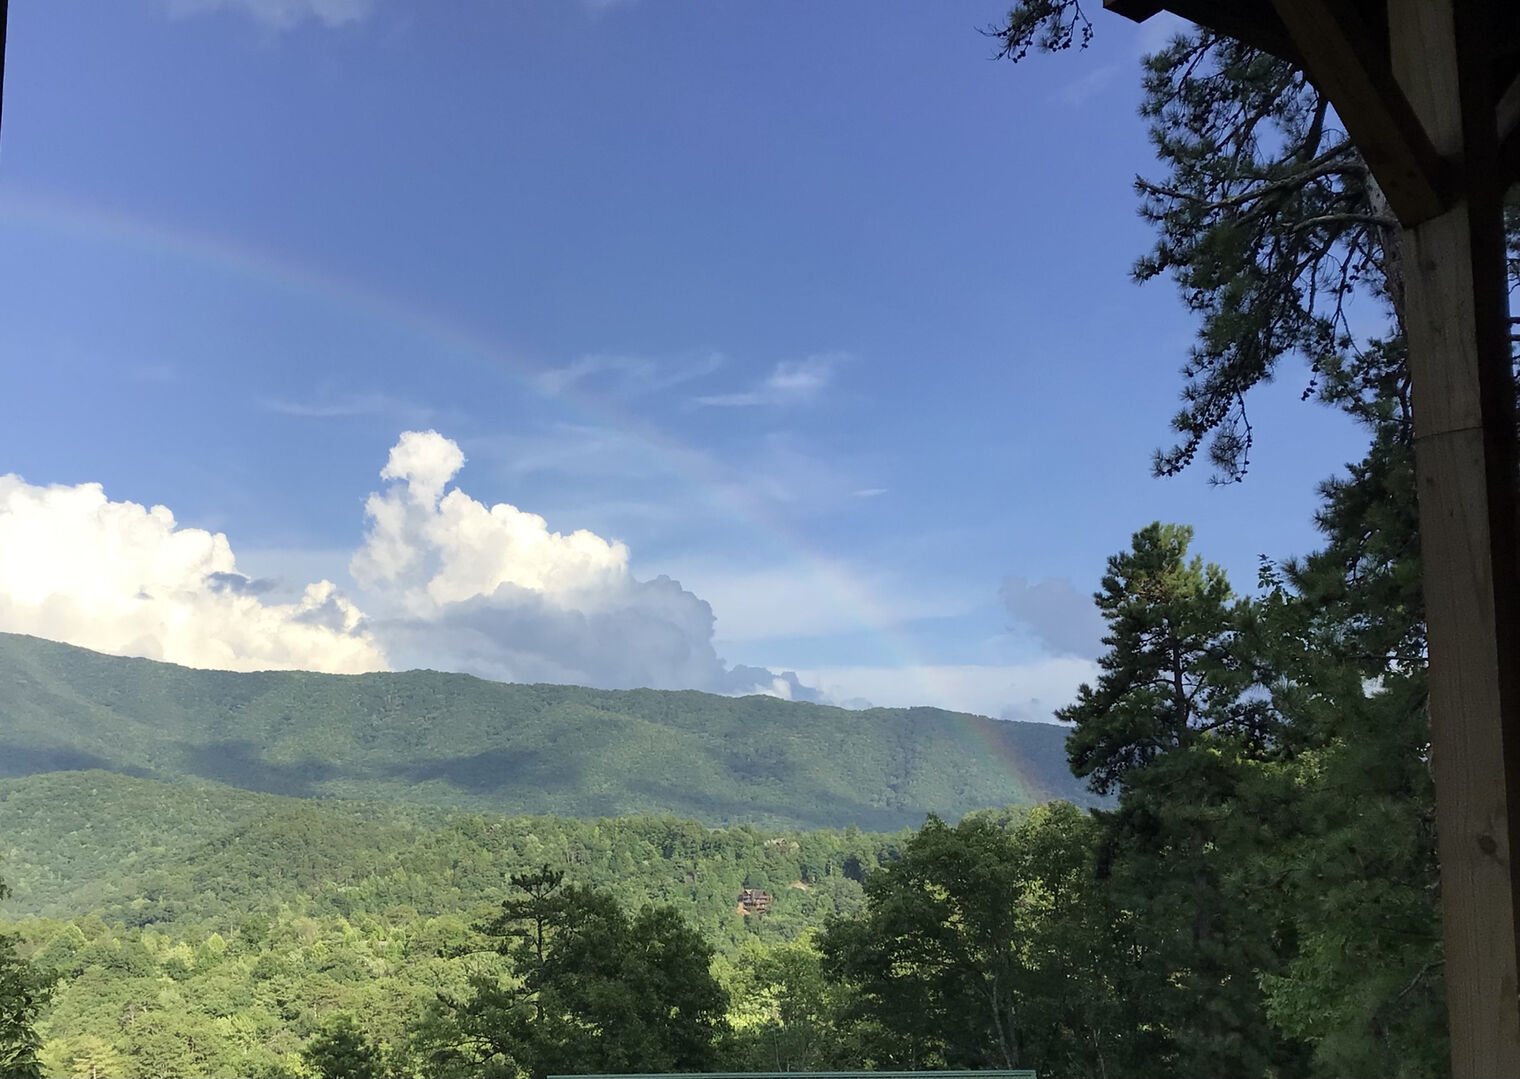 You can likely catch a view of a rainbow in the valley after a rain shower.